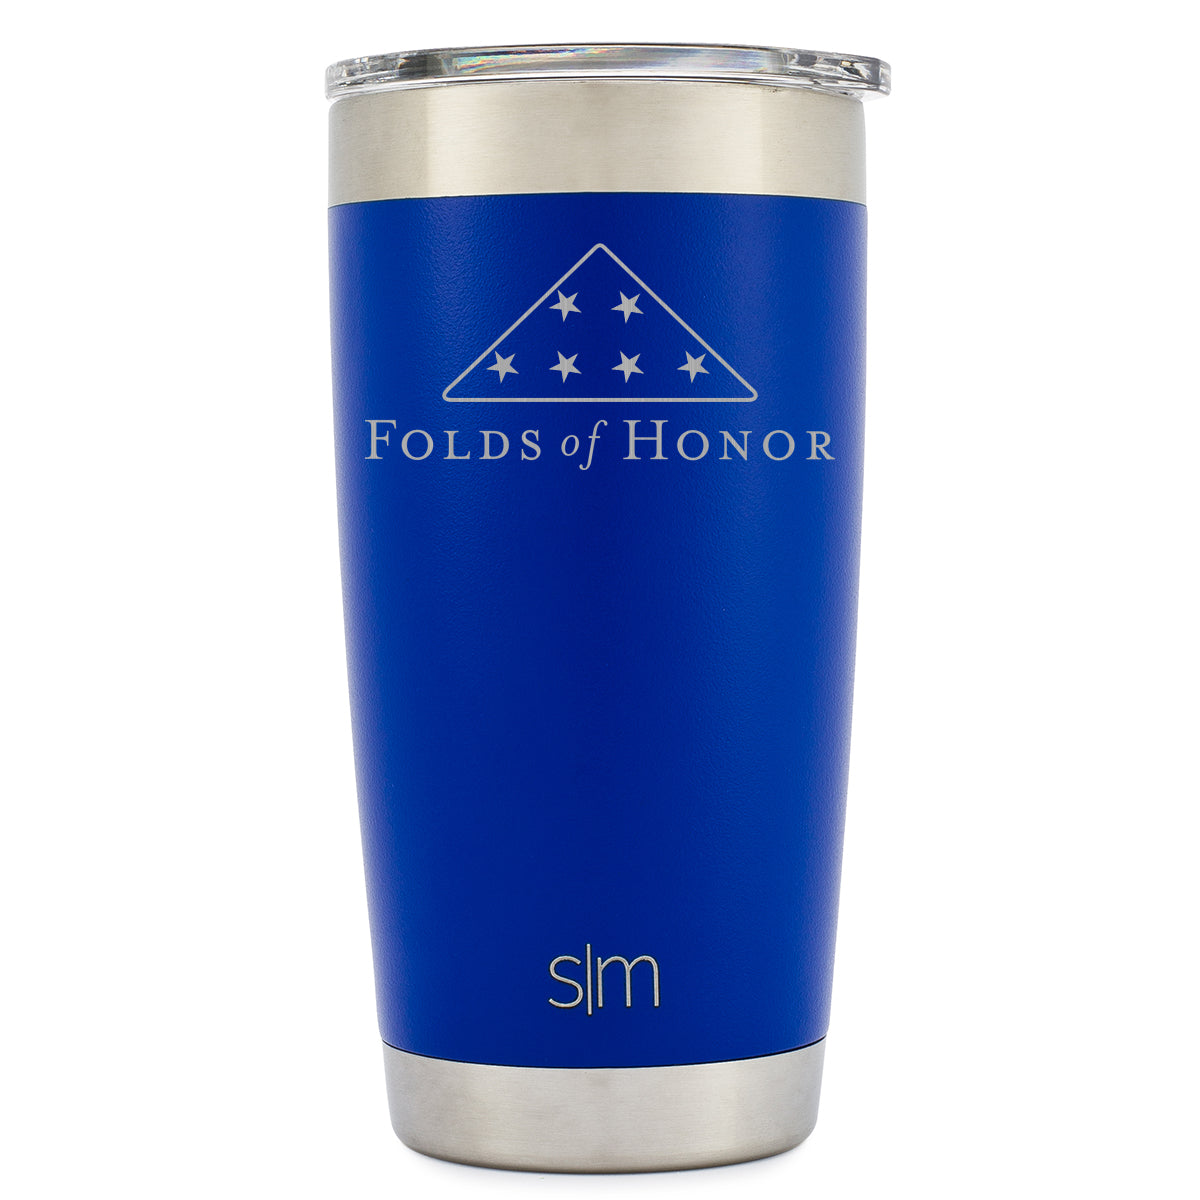 https://www.countryclubcollective.com/cdn/shop/products/Folds_of_Honor_CR20_Blue_1800x.jpg?v=1519922489